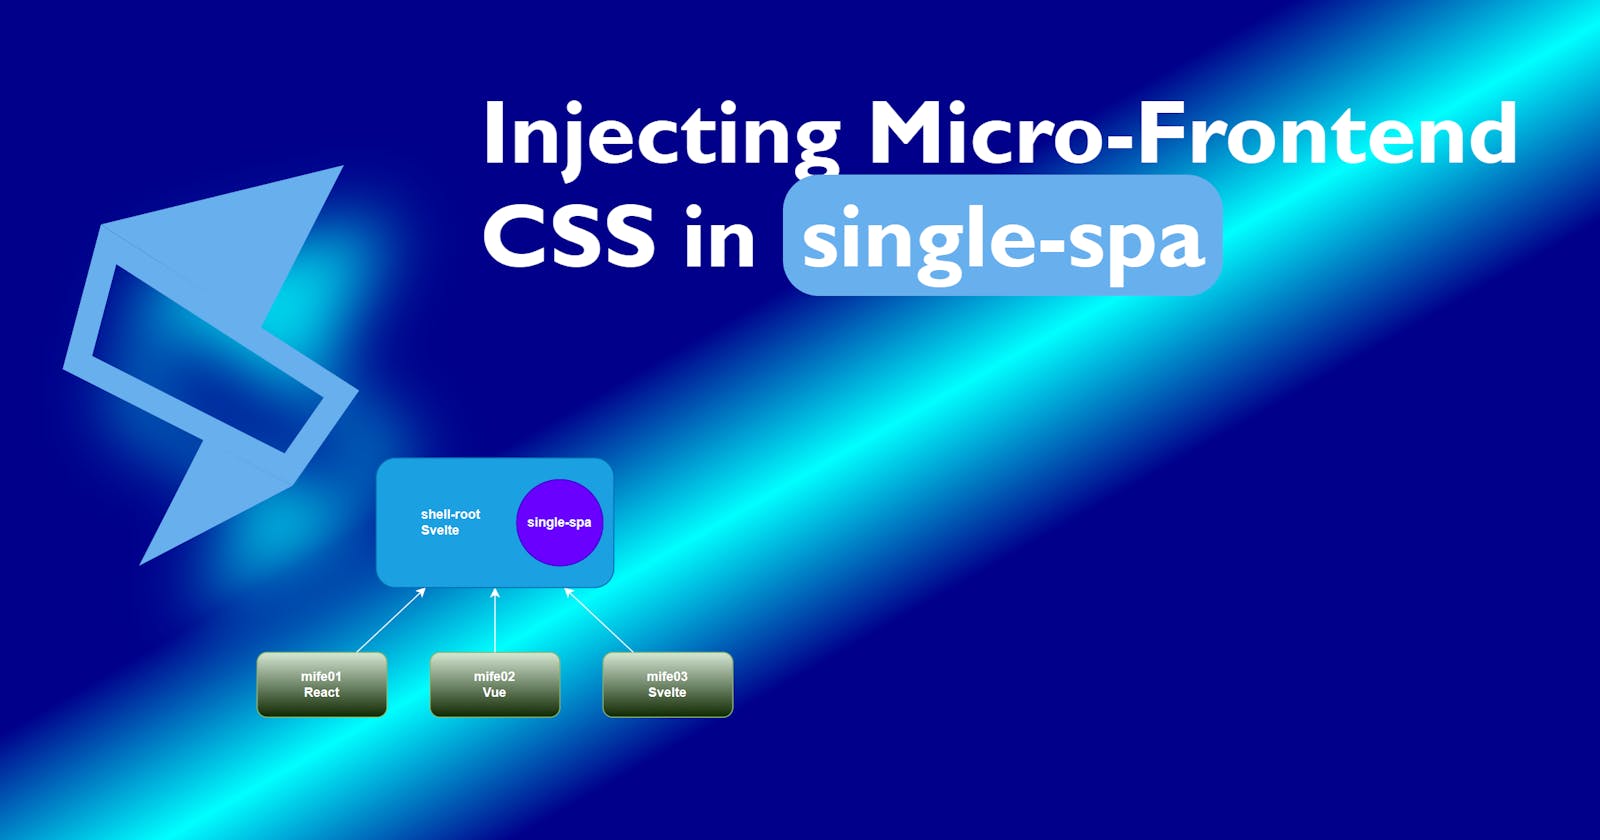 Injecting Micro-Frontend CSS in single-spa